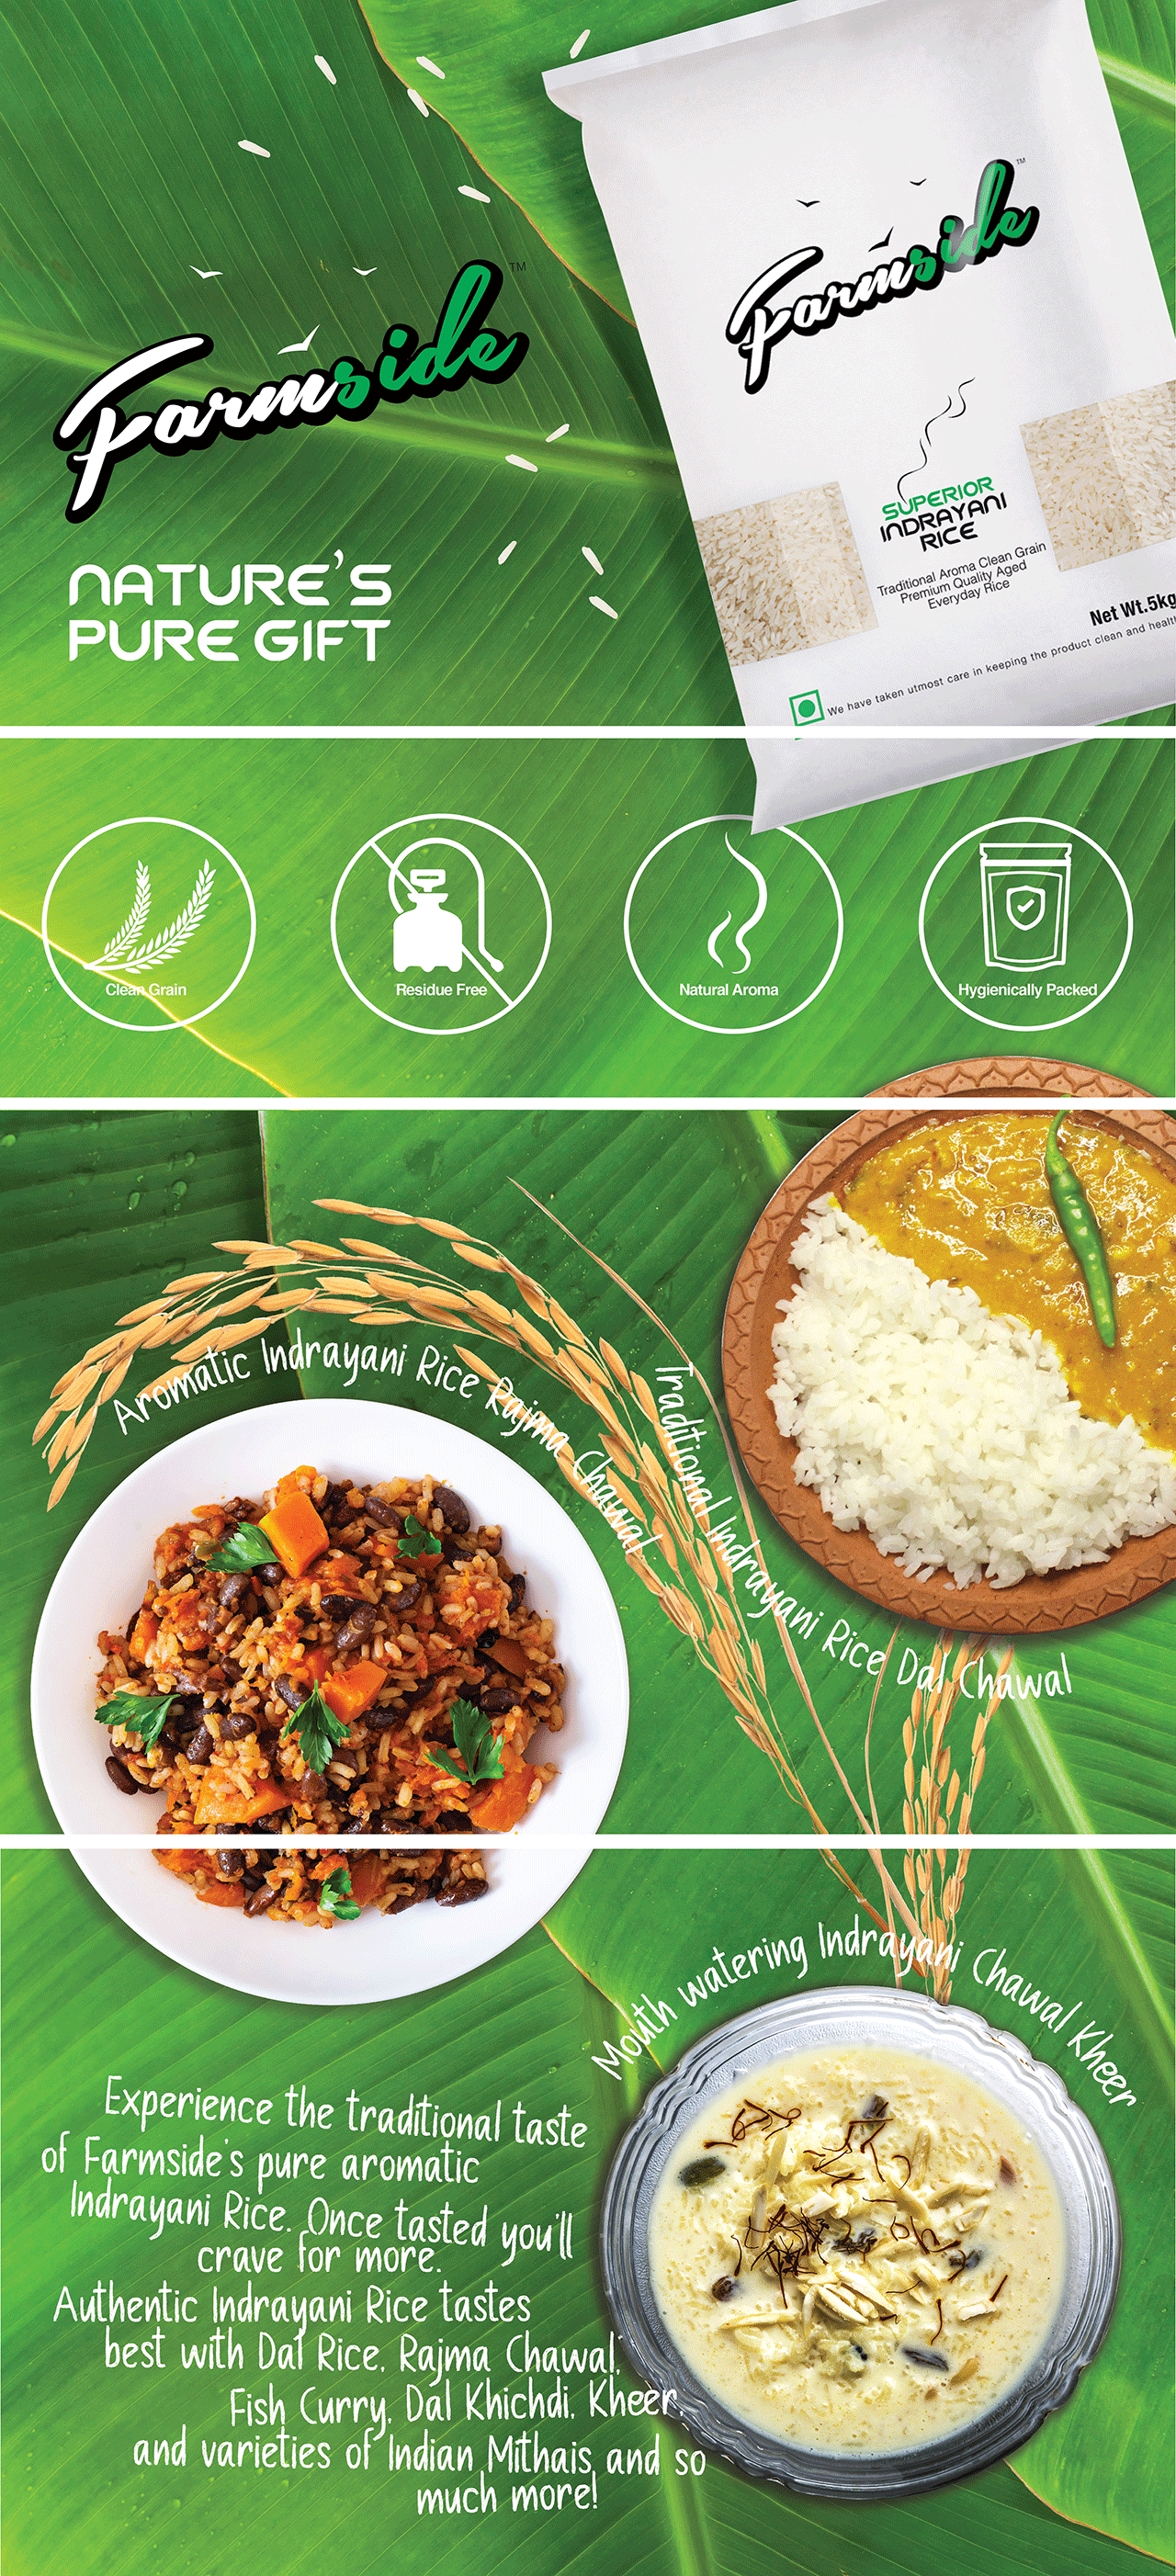 Image of A plus content of Indrayani Rice with packet image and pictures of rajma chawal, dal rice and kheer.